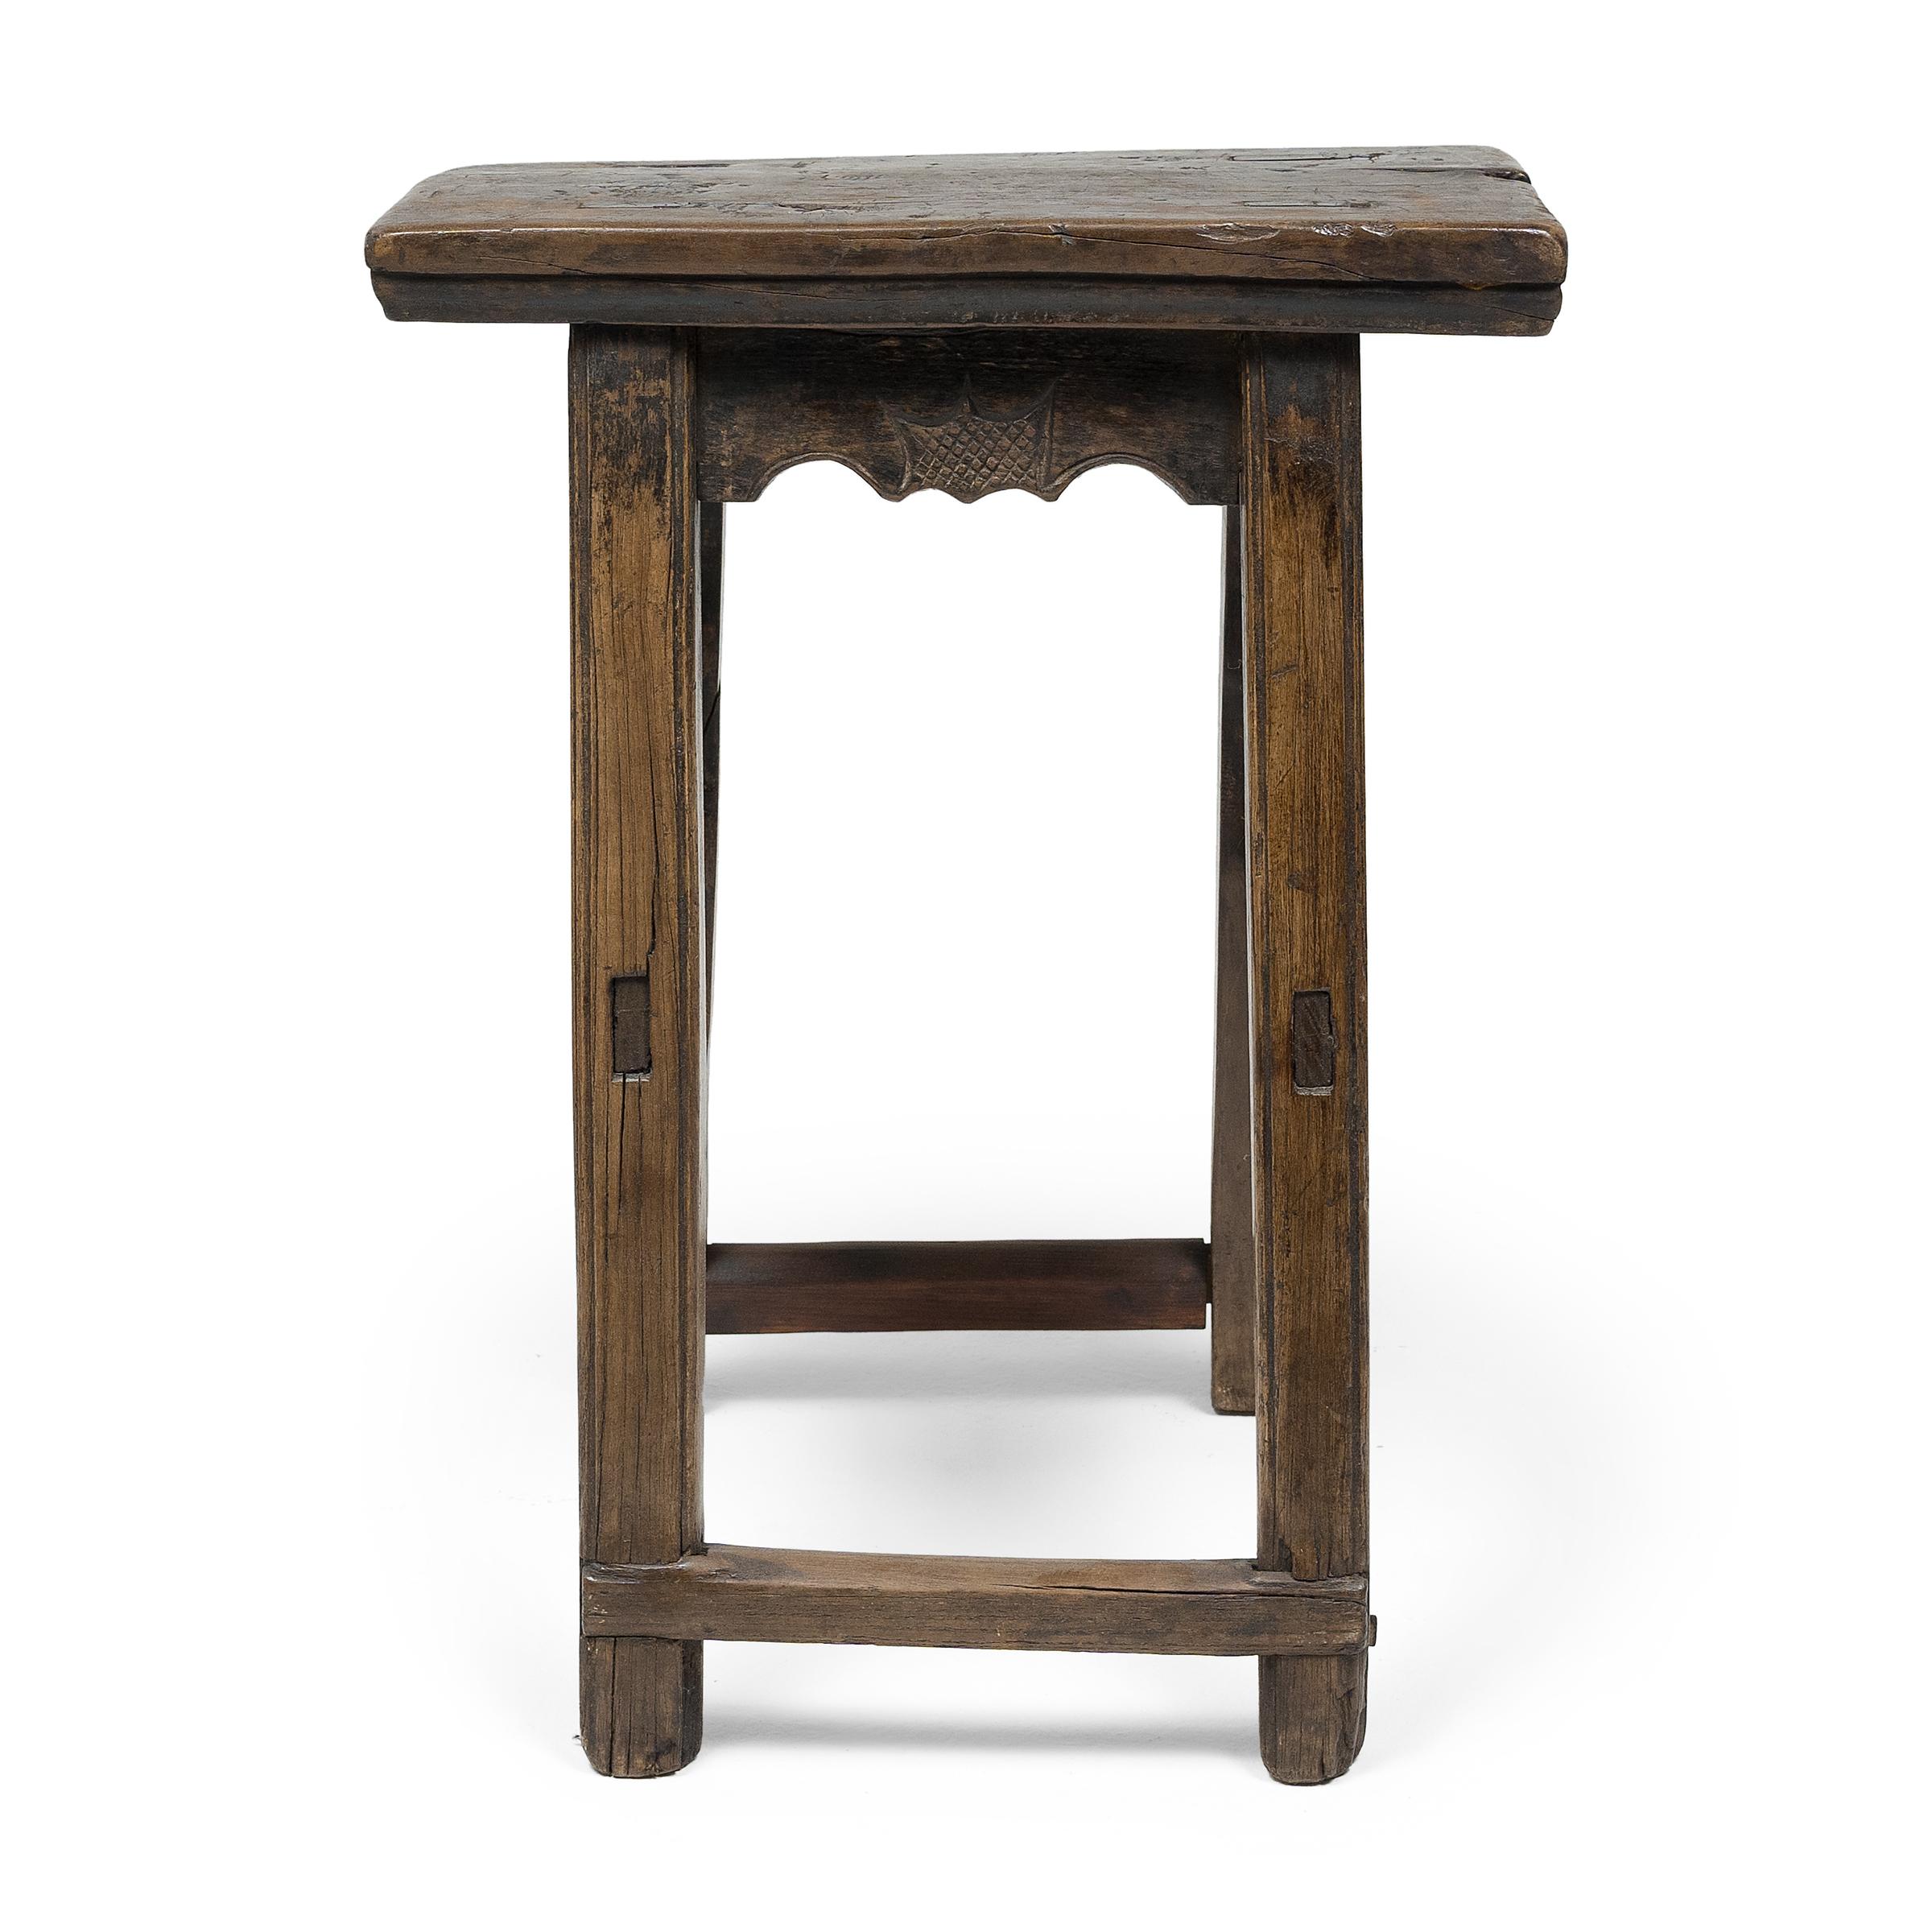 More portable than chairs, stools were a versatile seating option for Qing-dynasty scholars, nobles, and peasants alike. This Provincial stool dates to the turn of the century and would have been used throughout a courtyard home as versatile